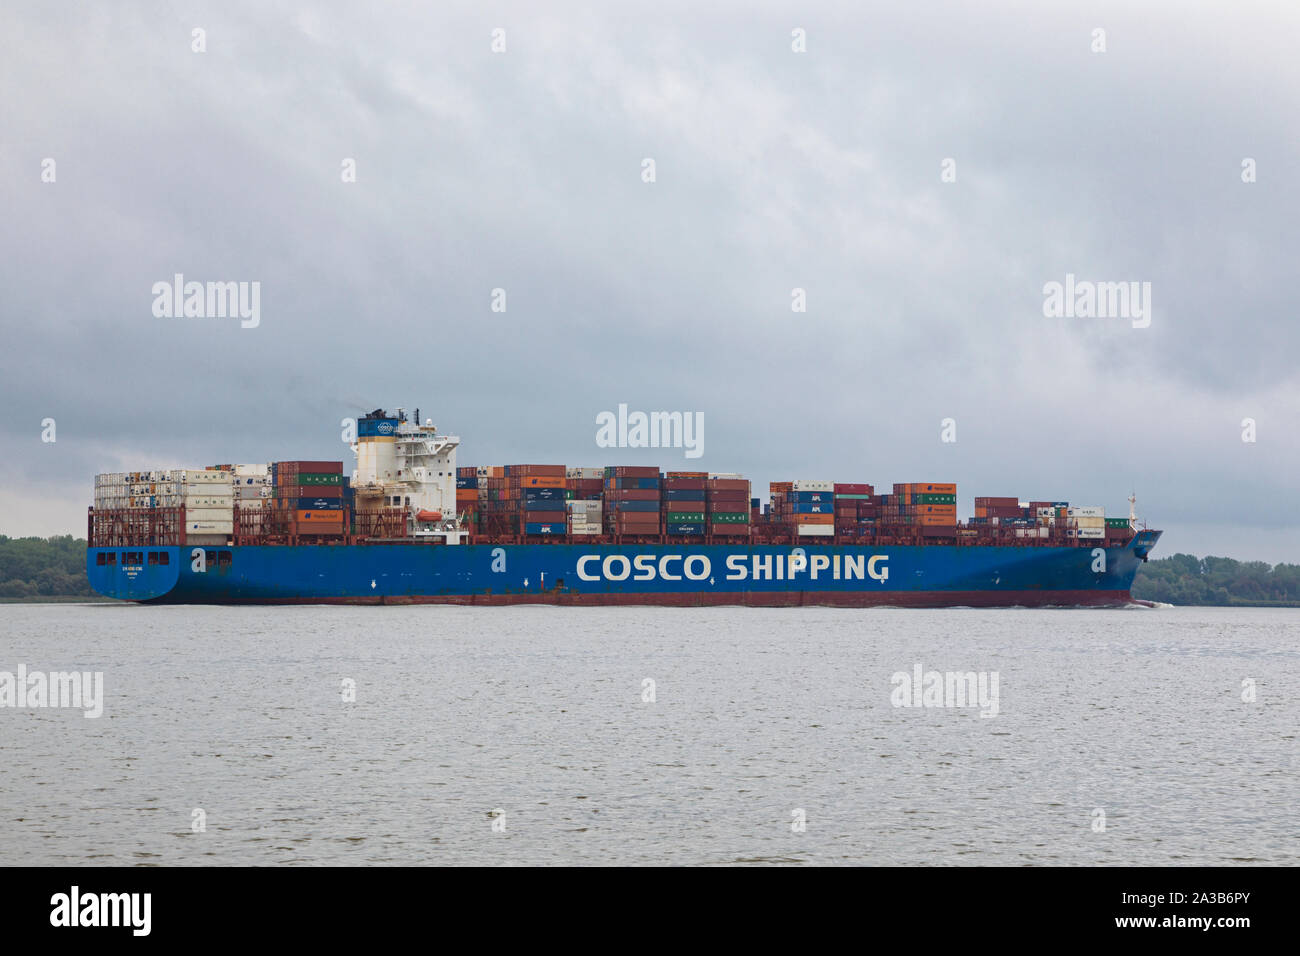 Container ship XIN HONG KONG, owned by China COSCO Shipping Corporation, on Elbe river heading to Hamburg Stock Photo